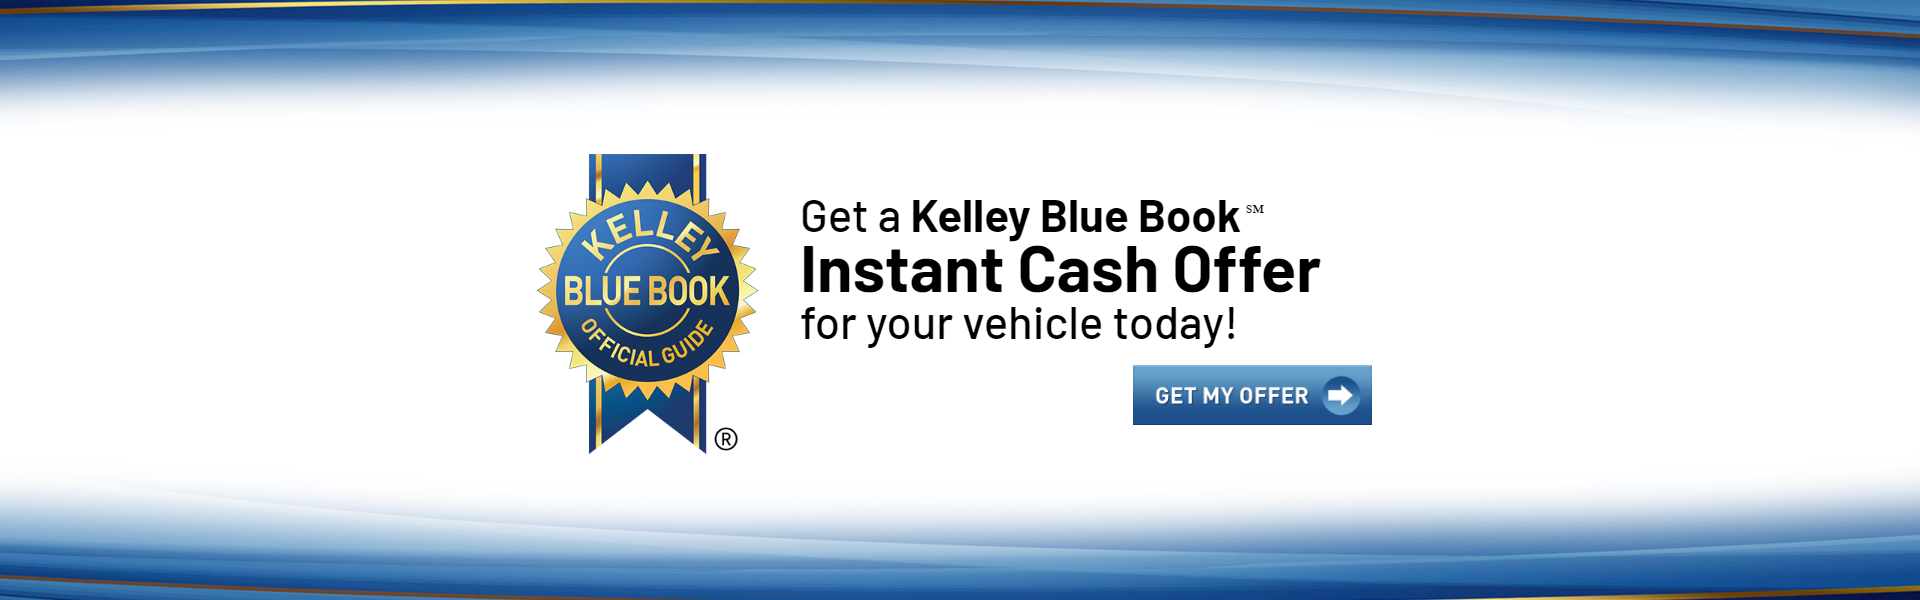 Get an Instant Cash Offer for your car